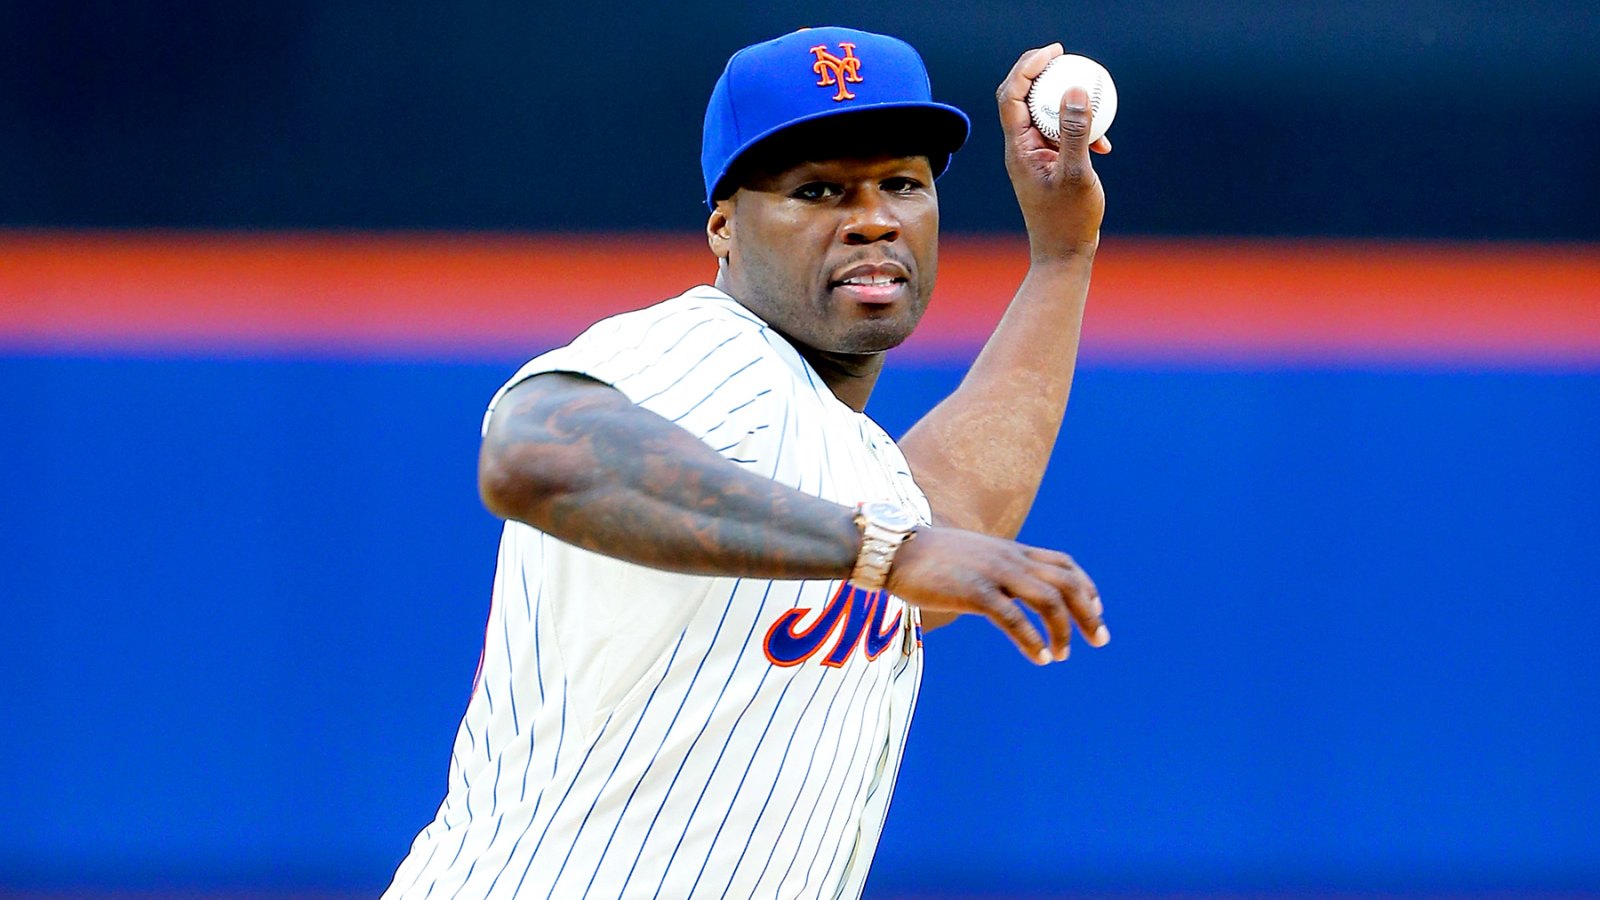 50 Cent throws the ceremonial first pitch of a game between the New York Mets and the Pittsburgh Pirates at Citi Field on May 27, 2014 in New York City.